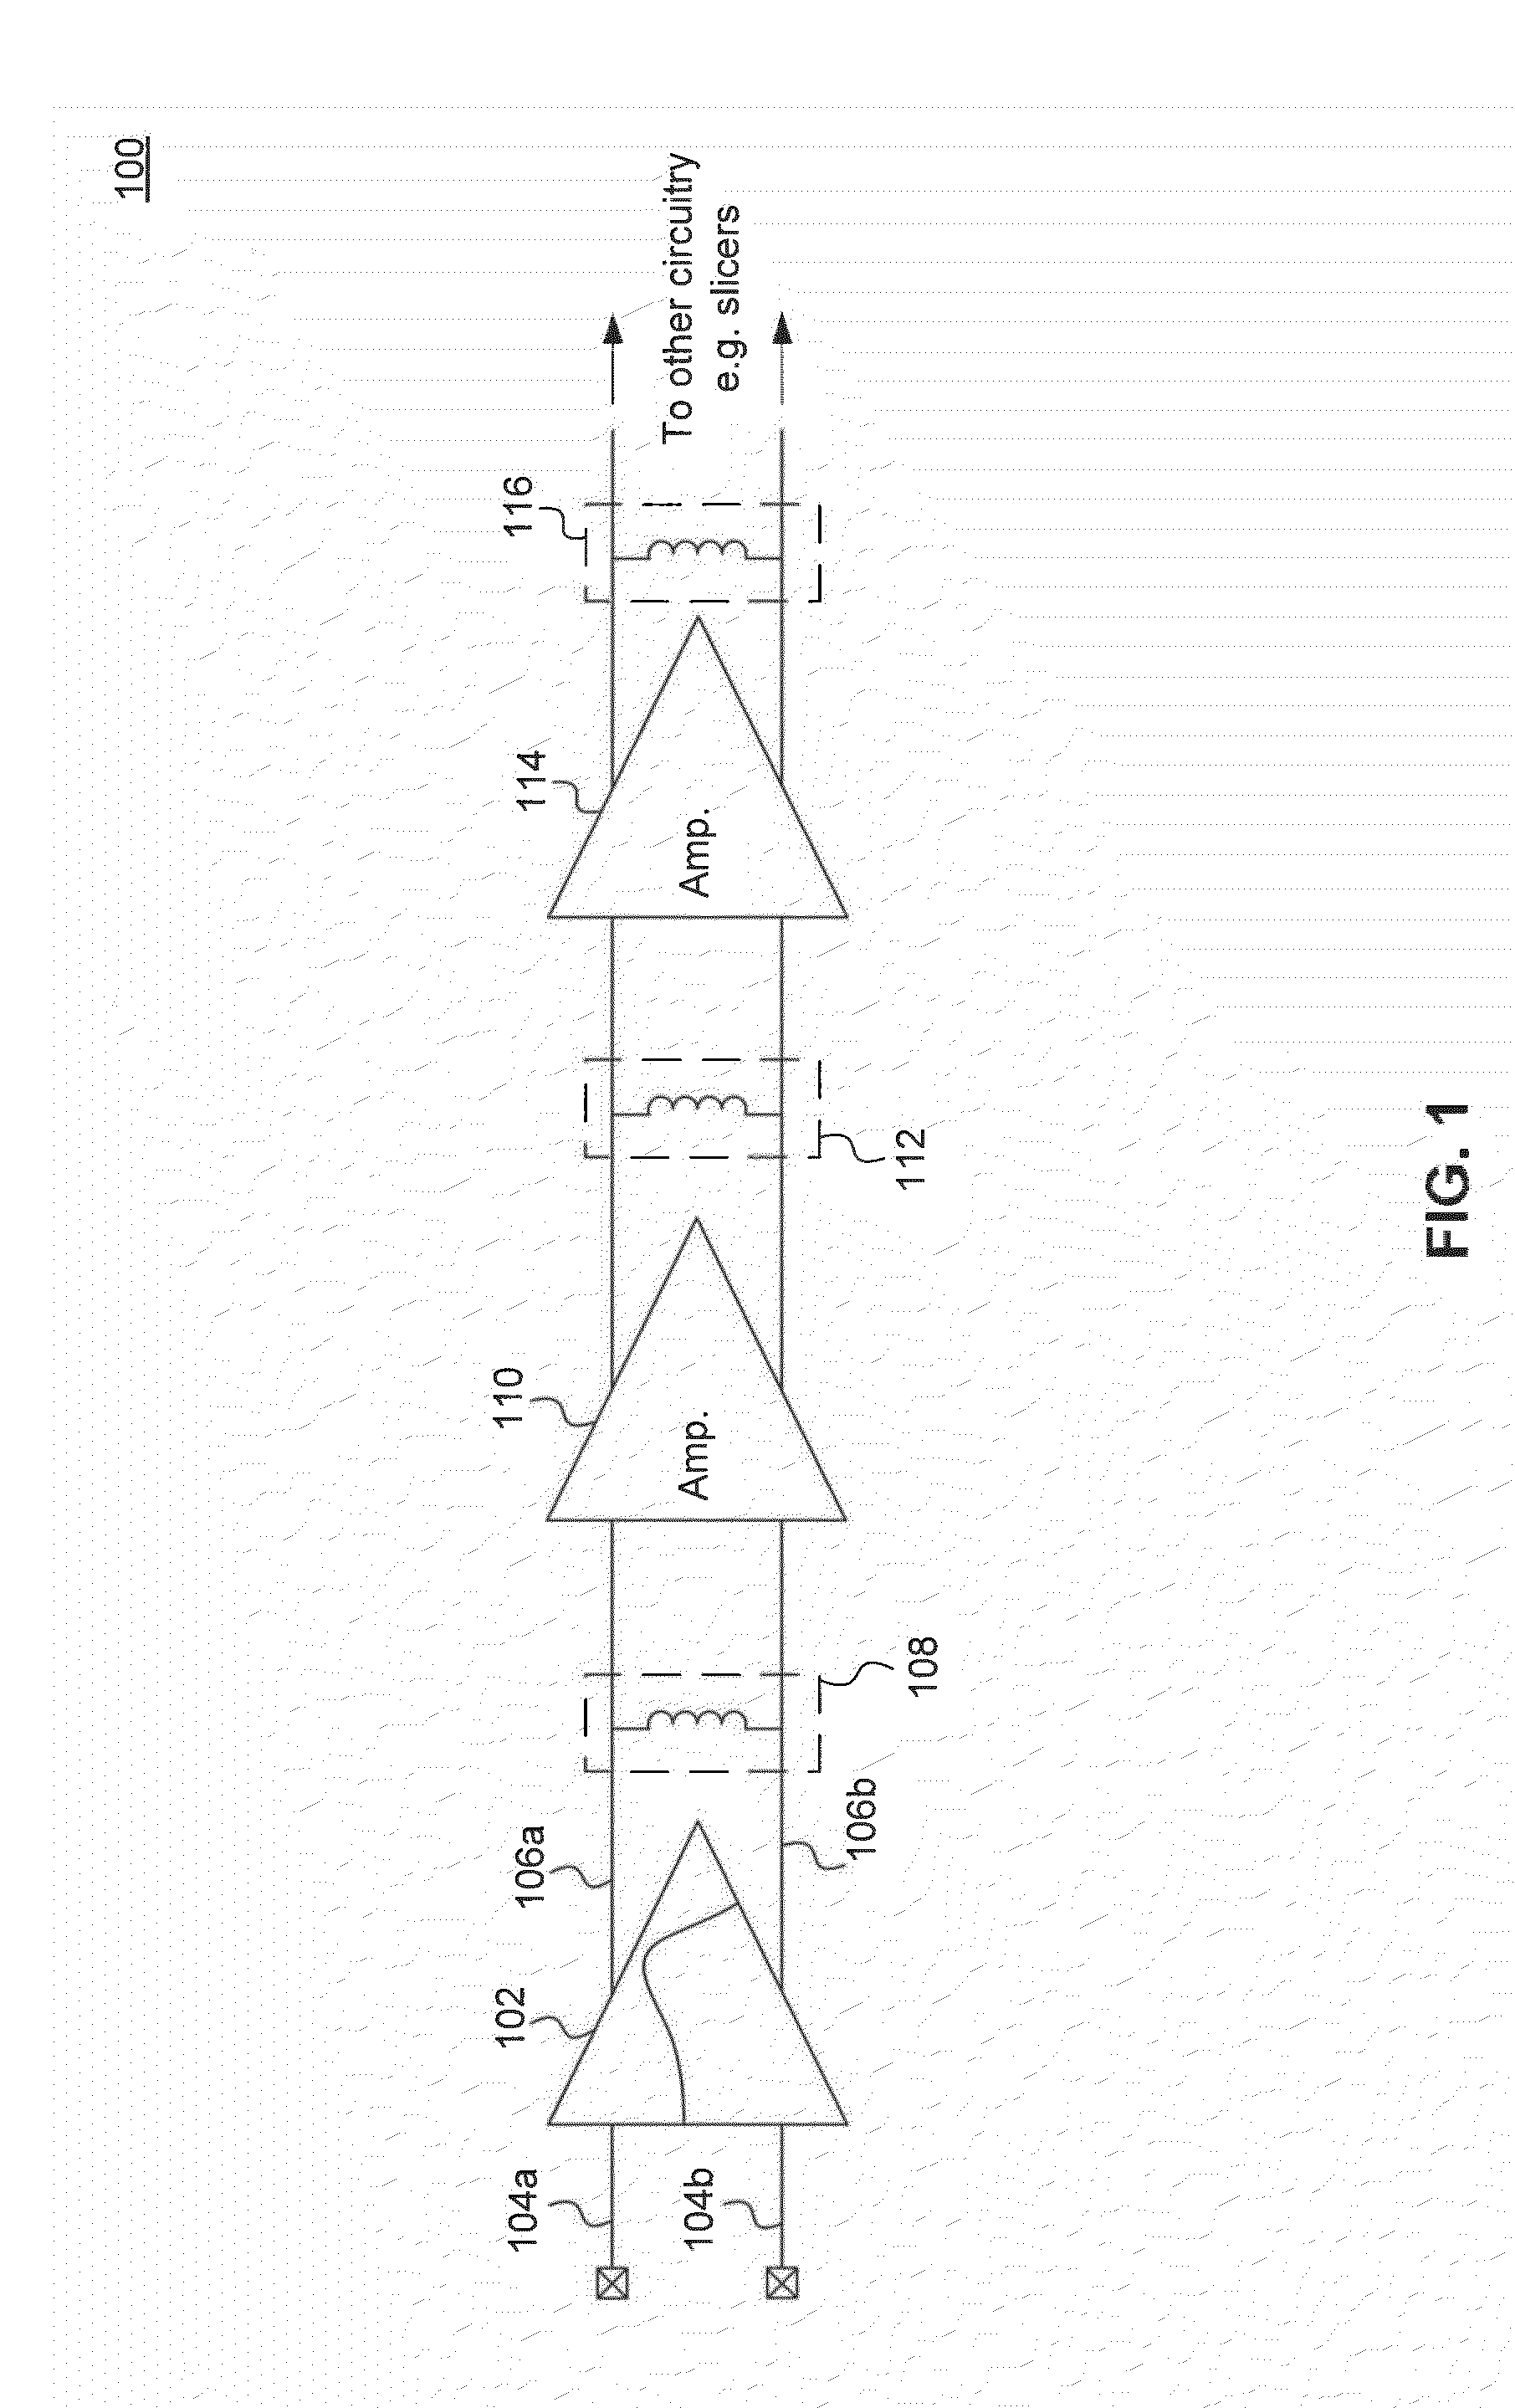 High Bandwidth Equalizer and Limiting Amplifier